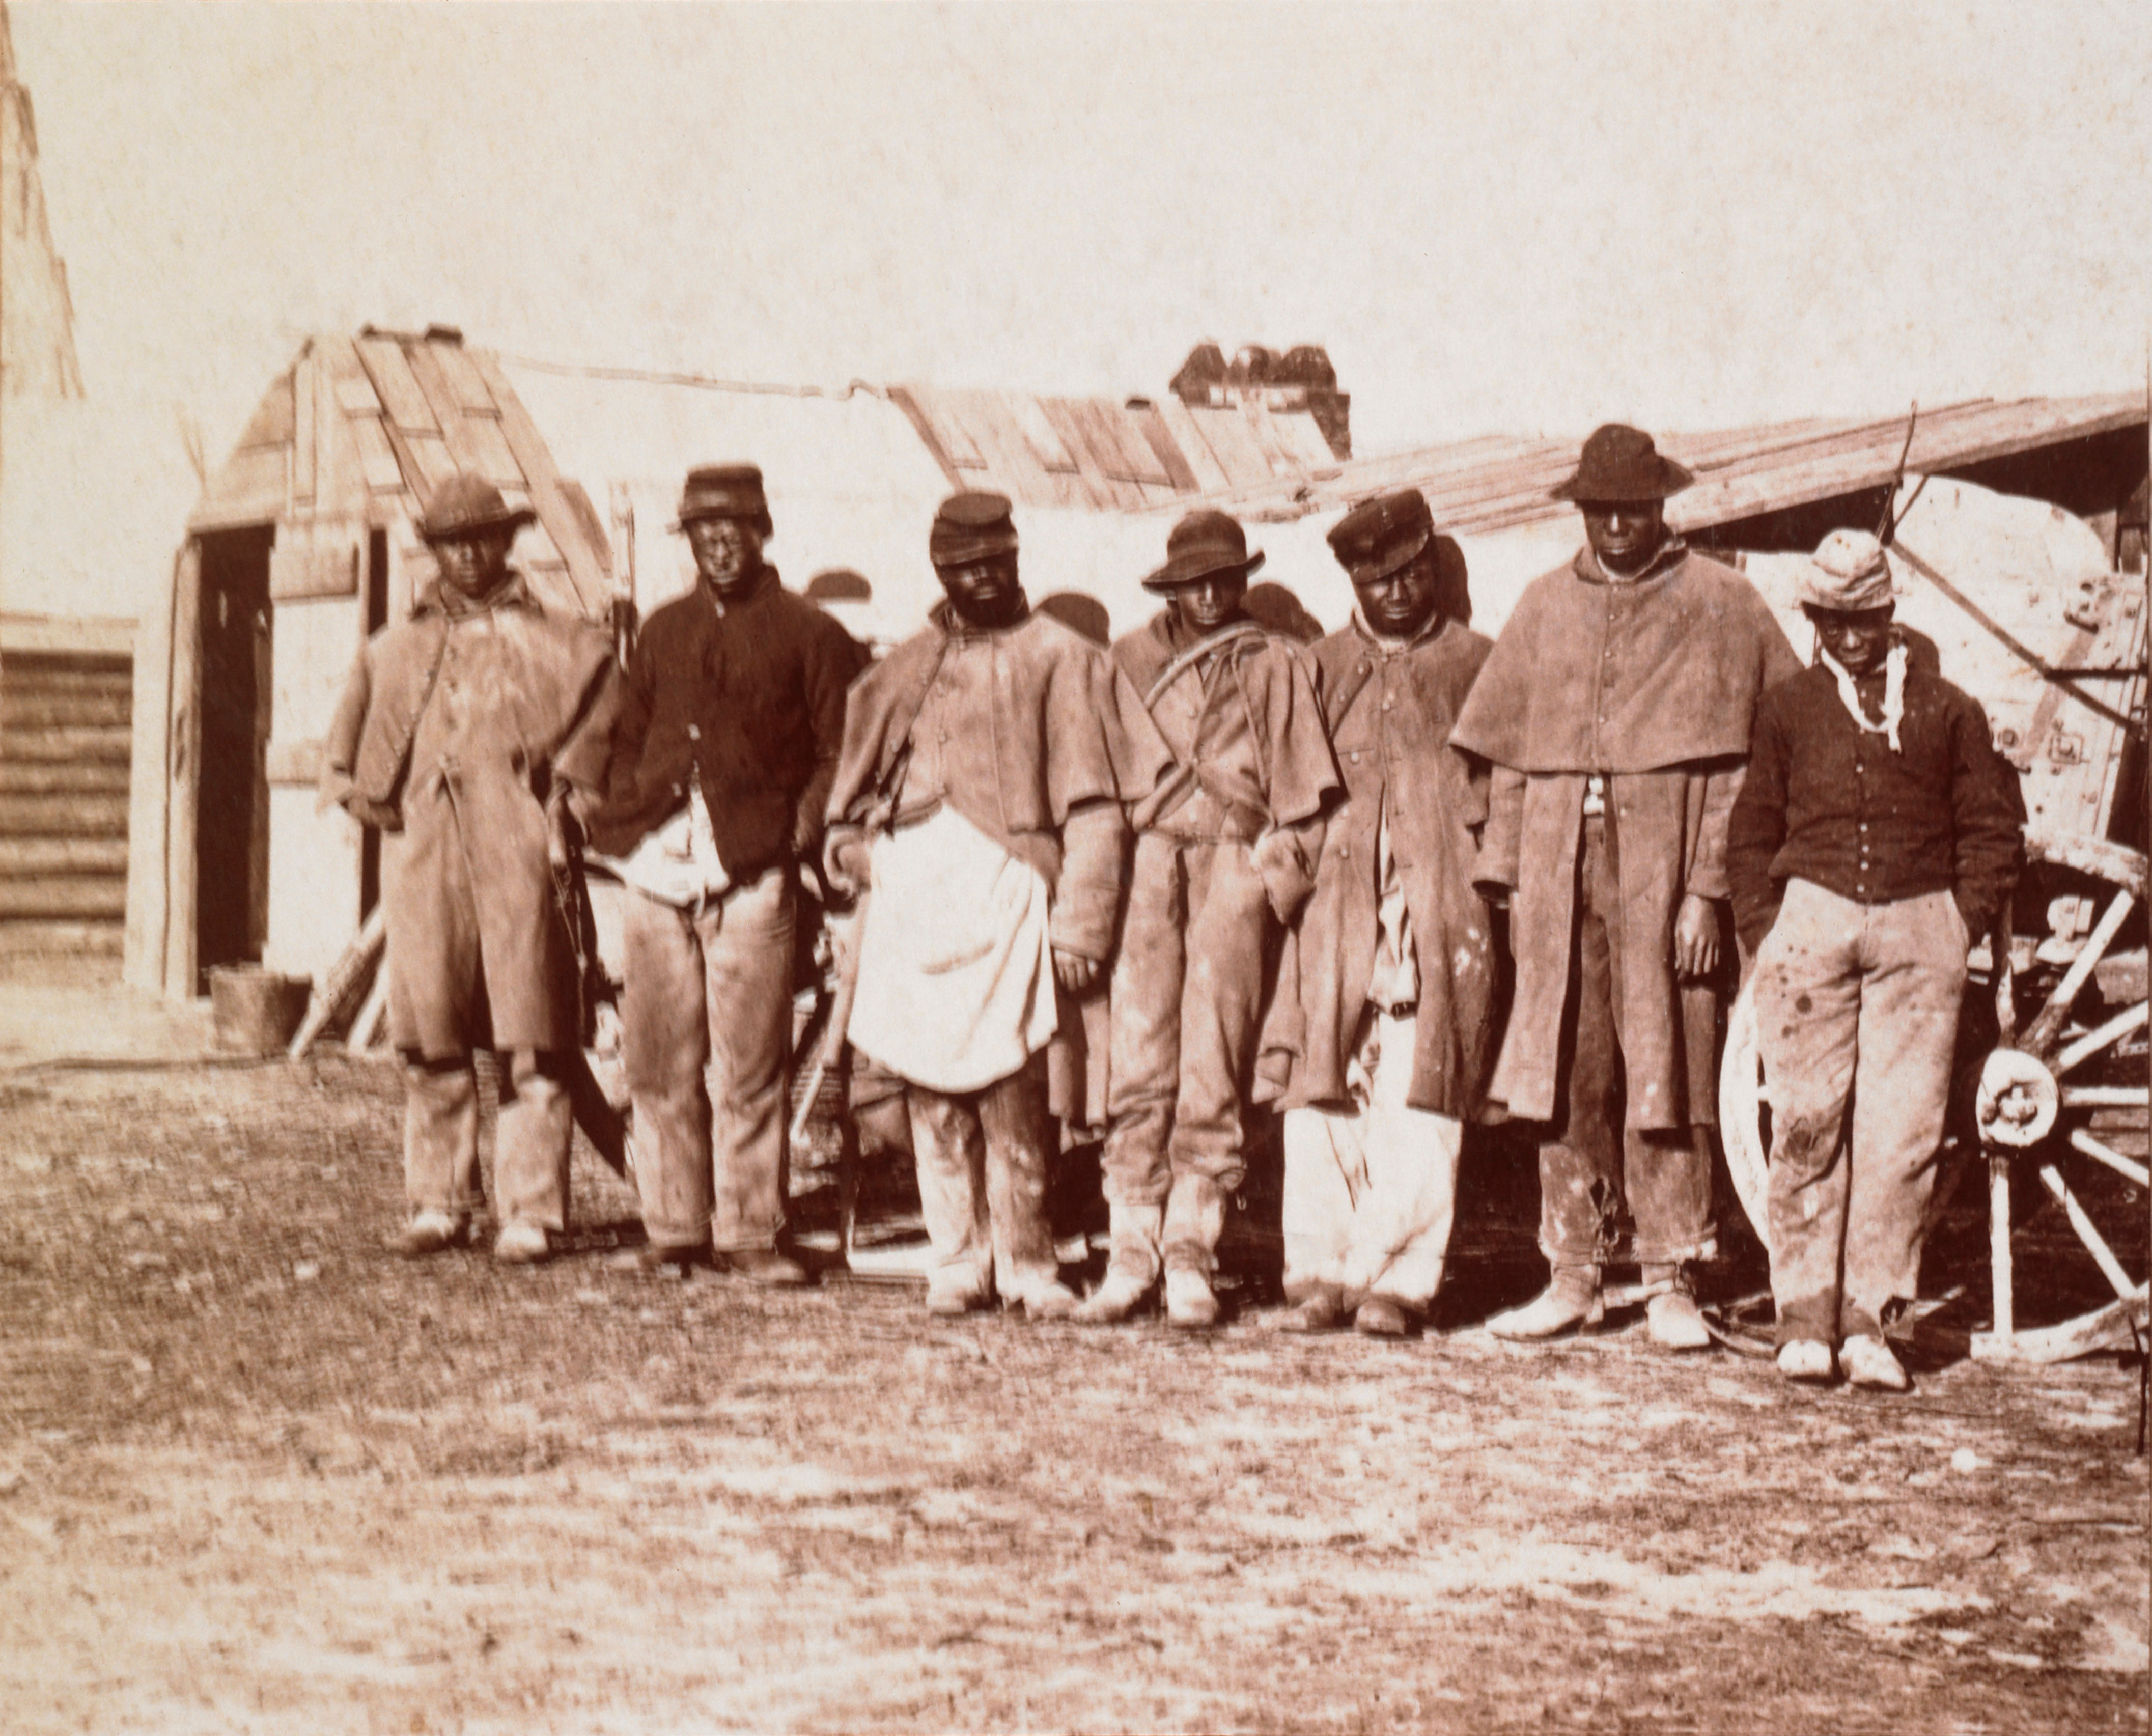 Remembering the American Civil War, History, Causes, & Legacy